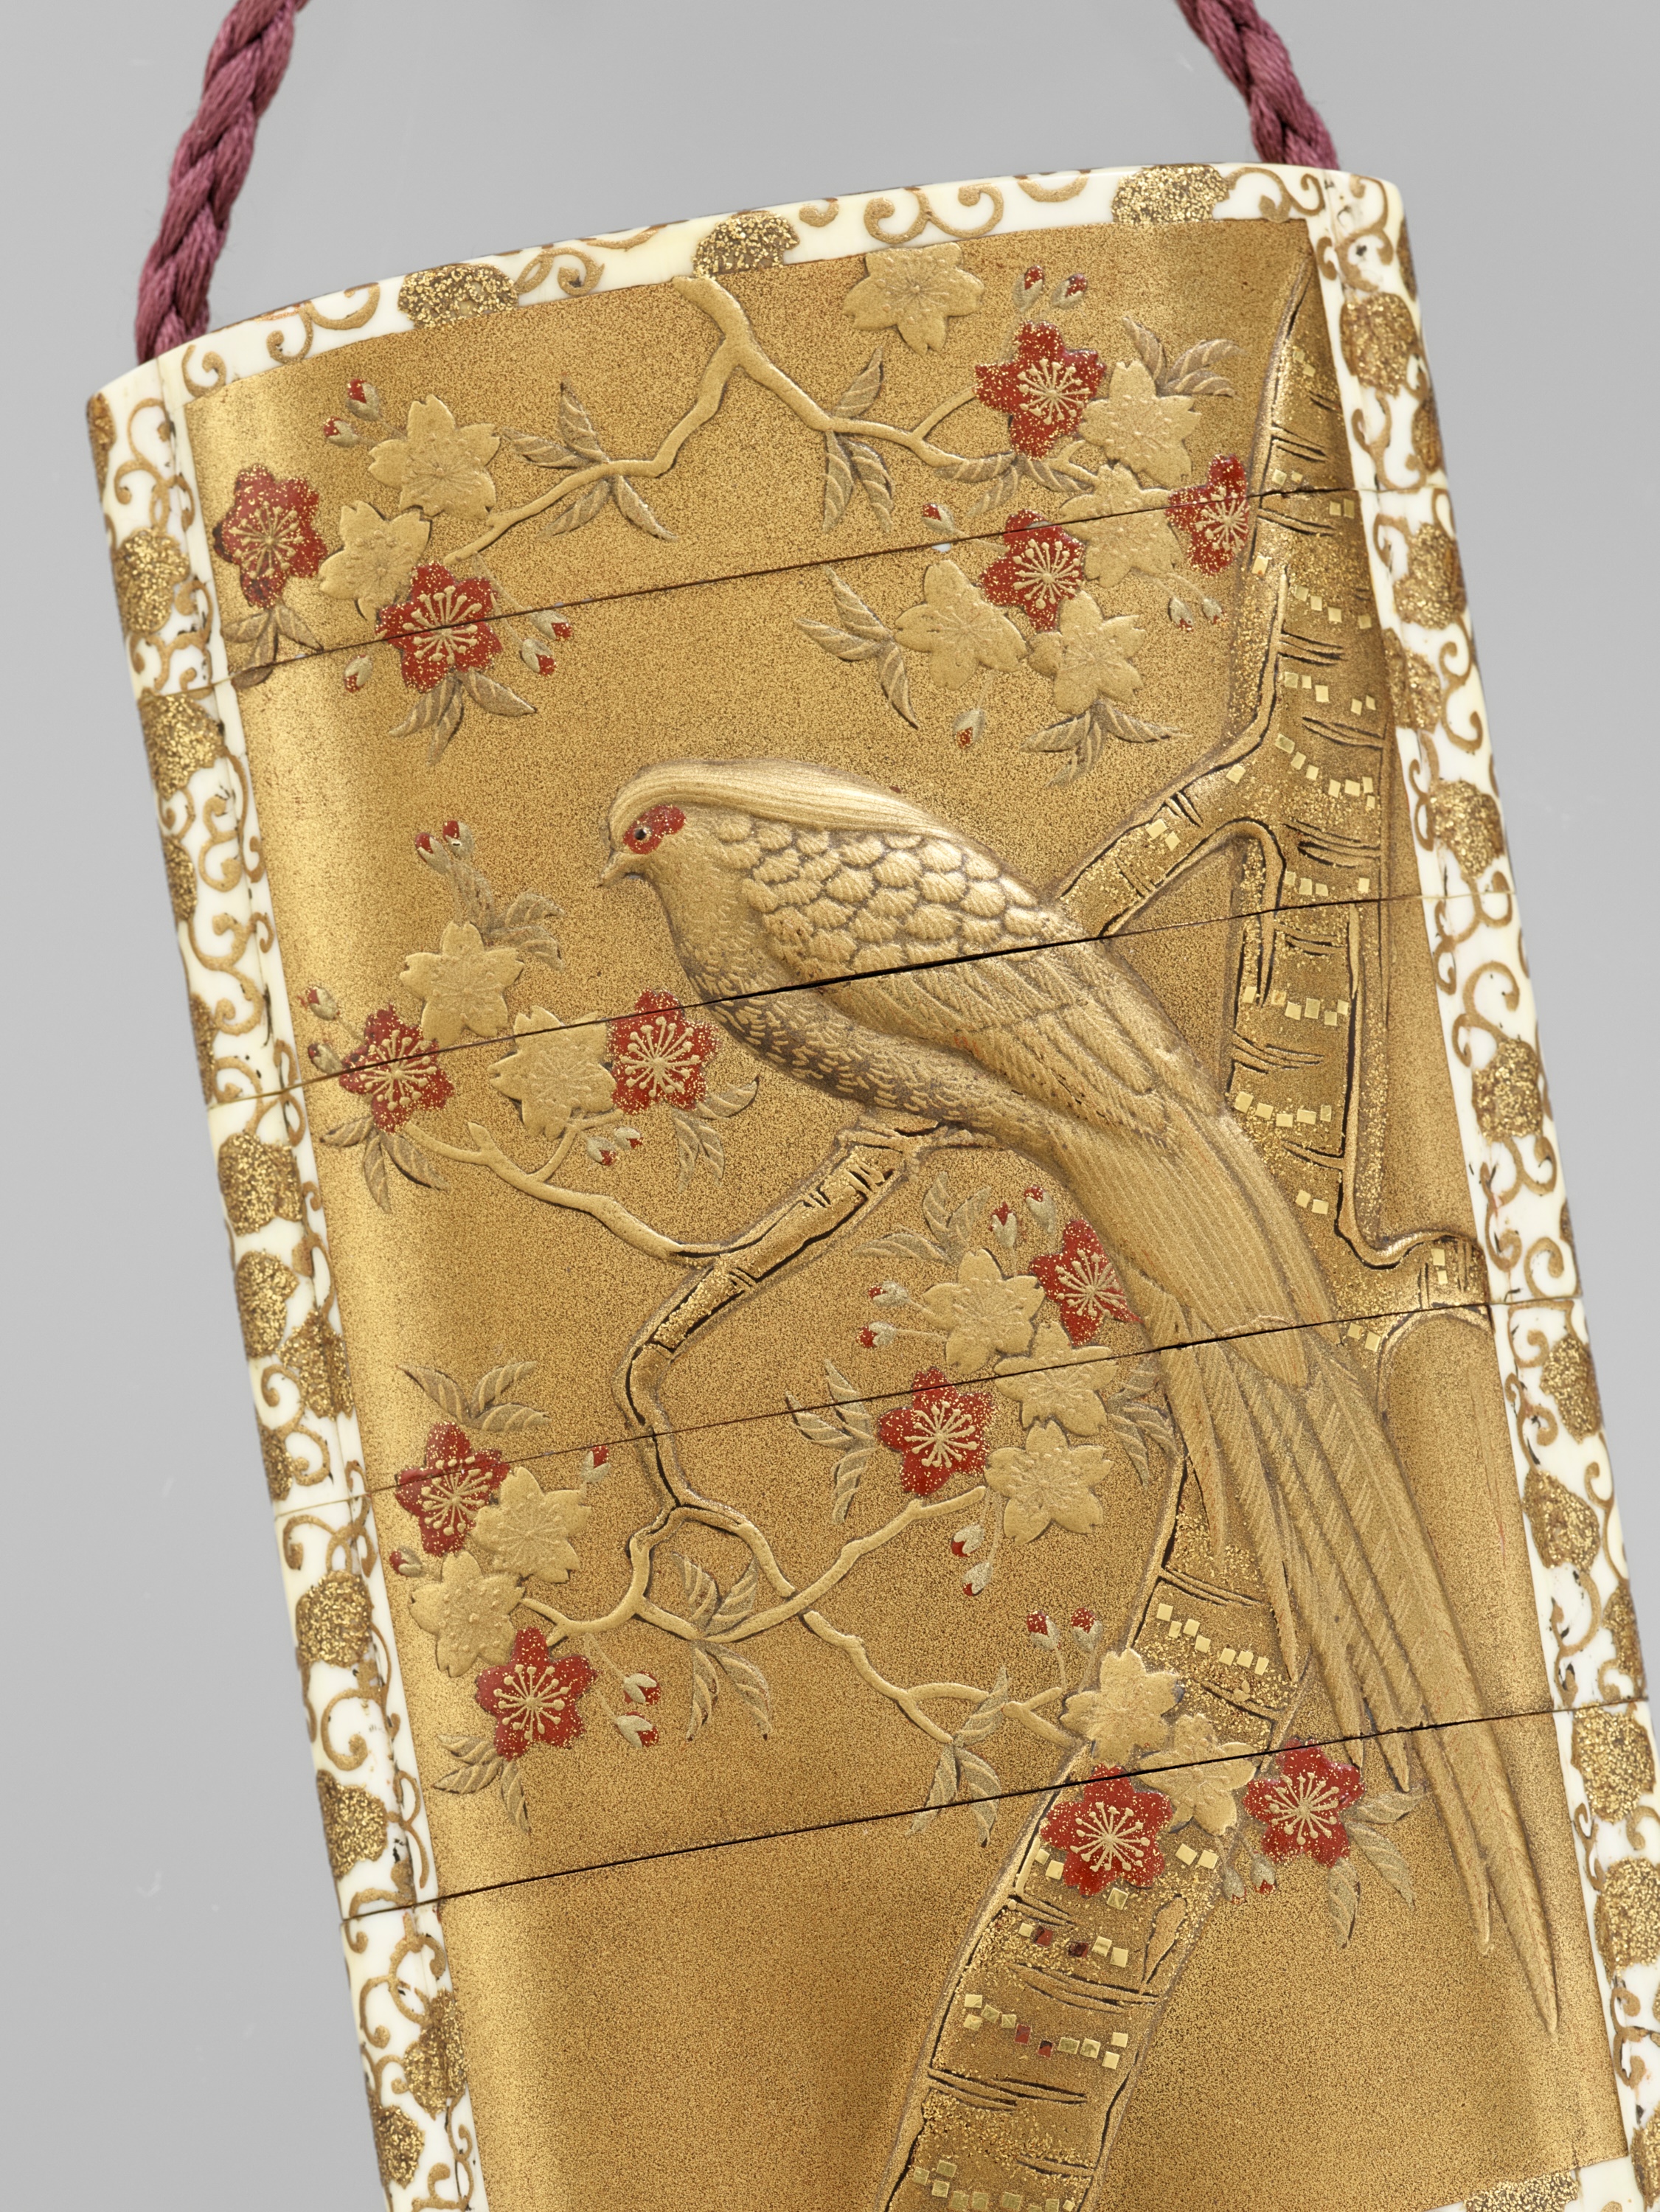 A RARE GOLD-LACQUERED IVORY FOUR-CASE INRO ENSEMBLE DEPICTING A PHEASANT AND PLOVERS - Image 6 of 10